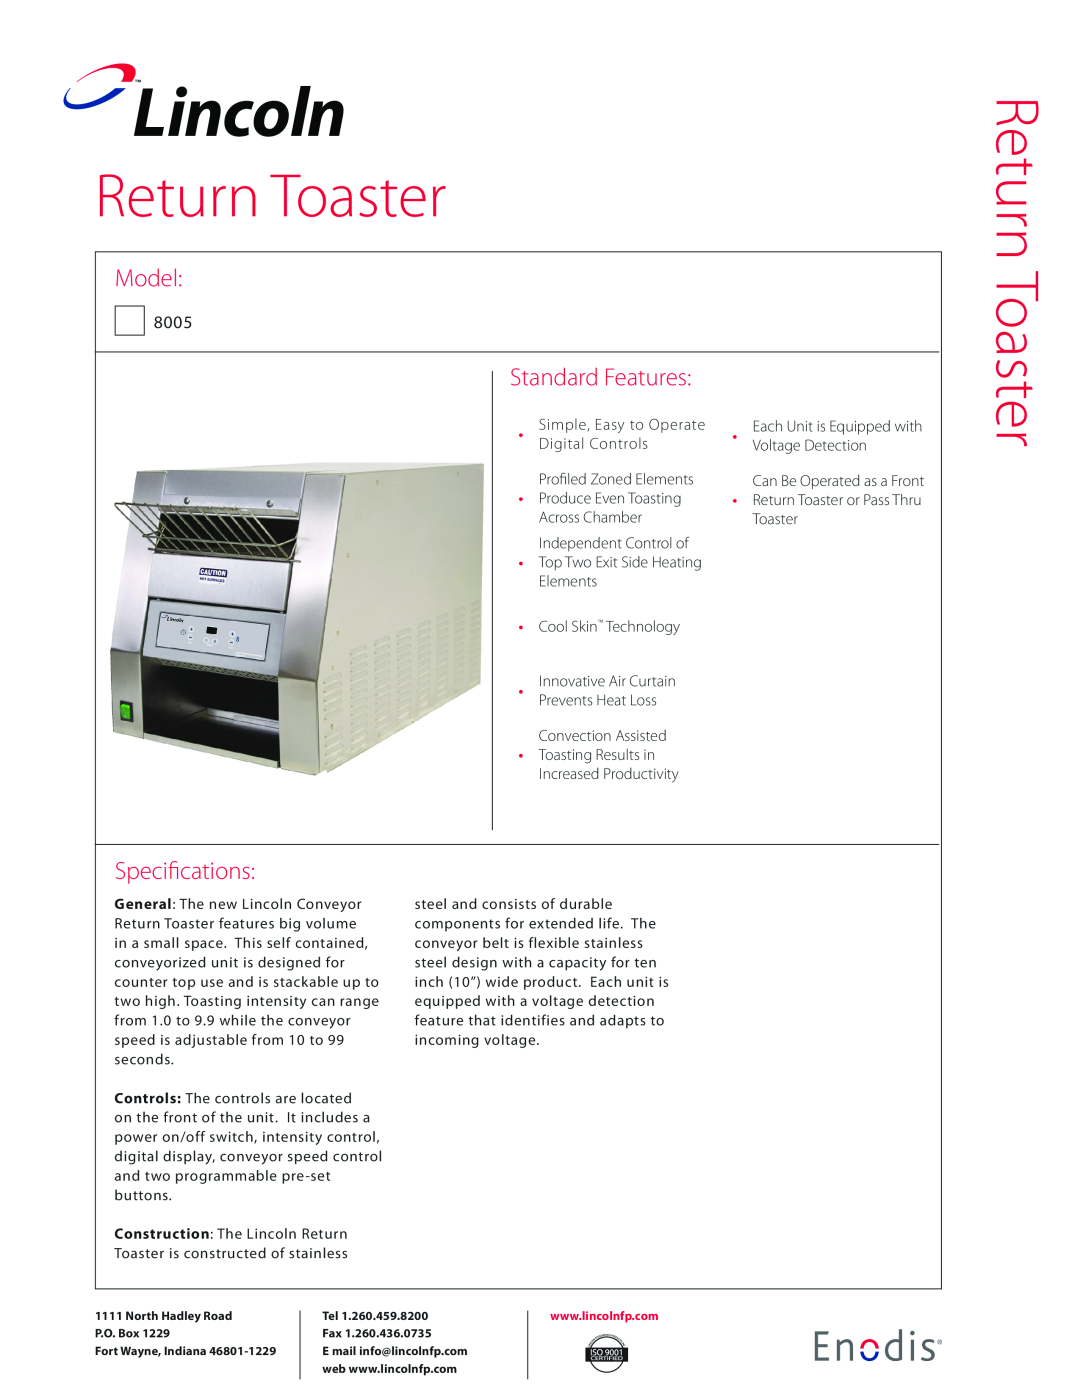 Lincoln 8005 specifications Lincoln, Return Toaster, Model, Standard Features, Specifications 